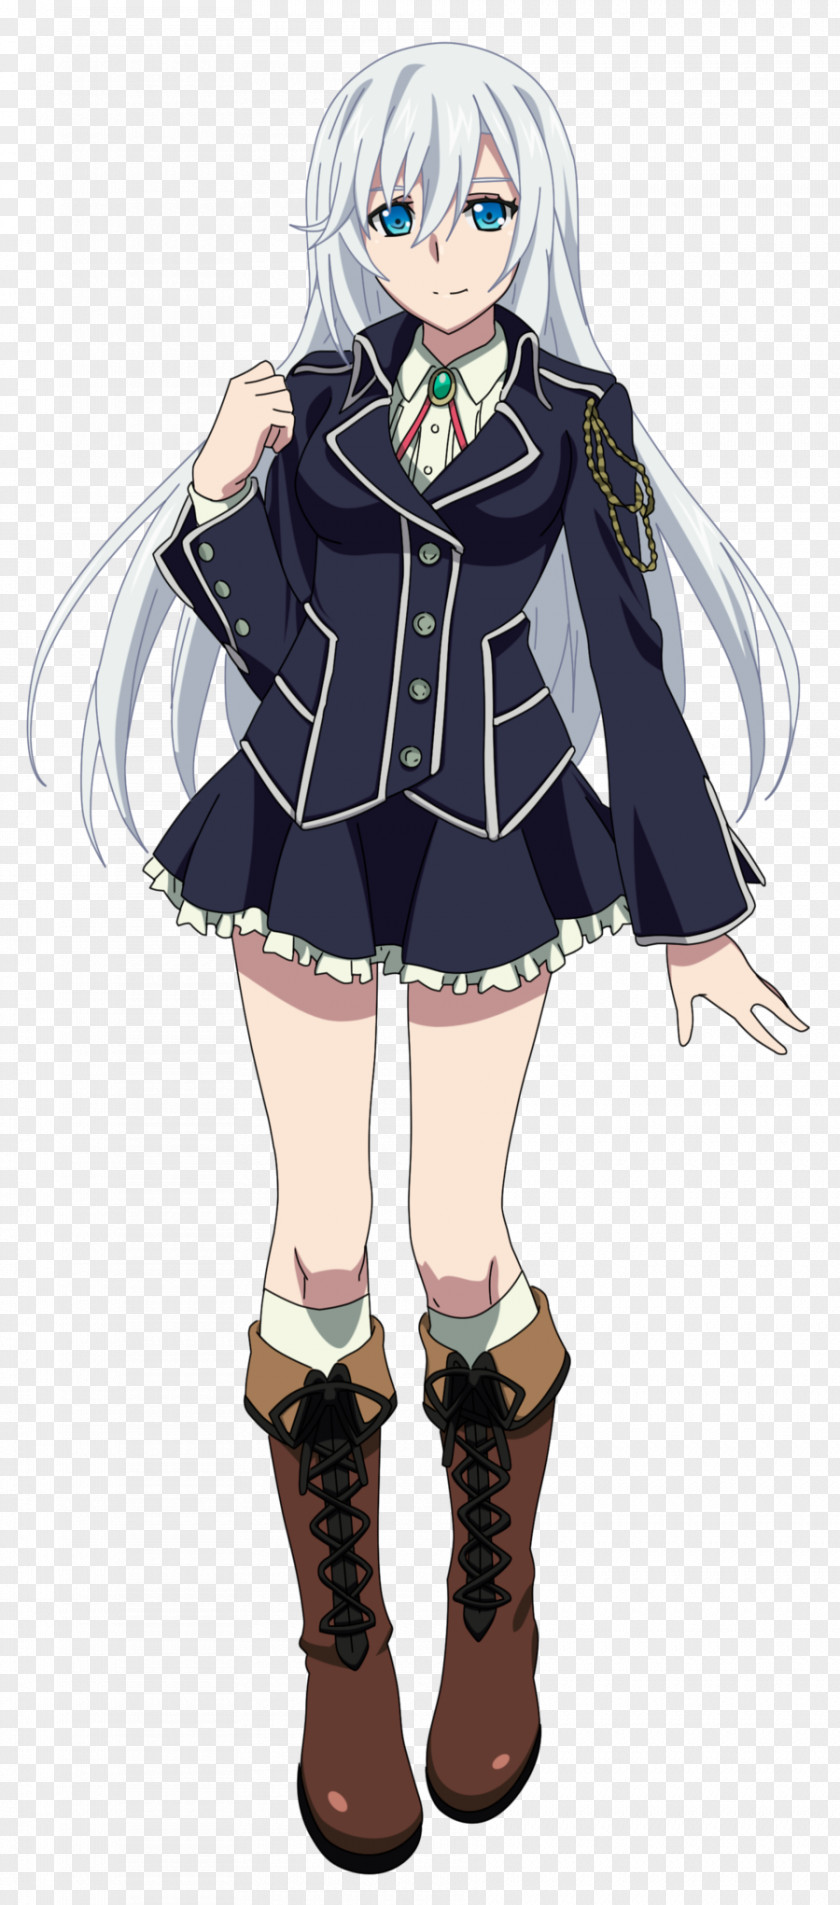 Strike The Blood Kanon Kanase Character Seiyu Anime PNG the Anime, others clipart PNG